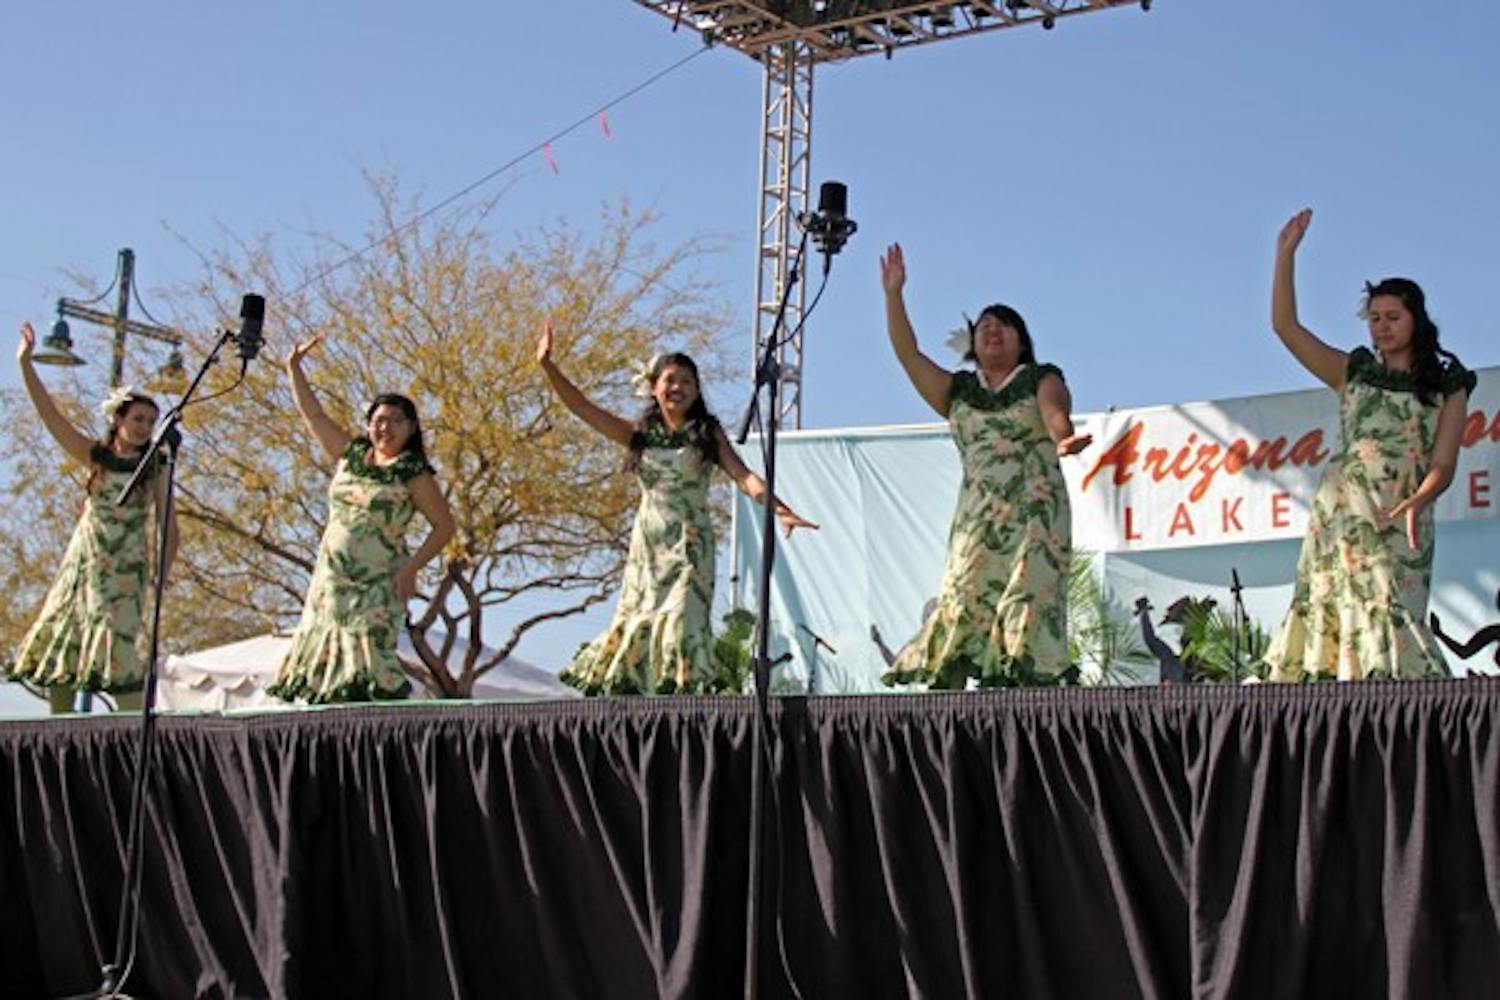 Polynesian dancers perform at the Arizona Aloha Festival on March 10 at Tempe Beach Park. The festival featured authentic music, dancing and food of the Hawaiian culture. (Photo by Diana Lustig)